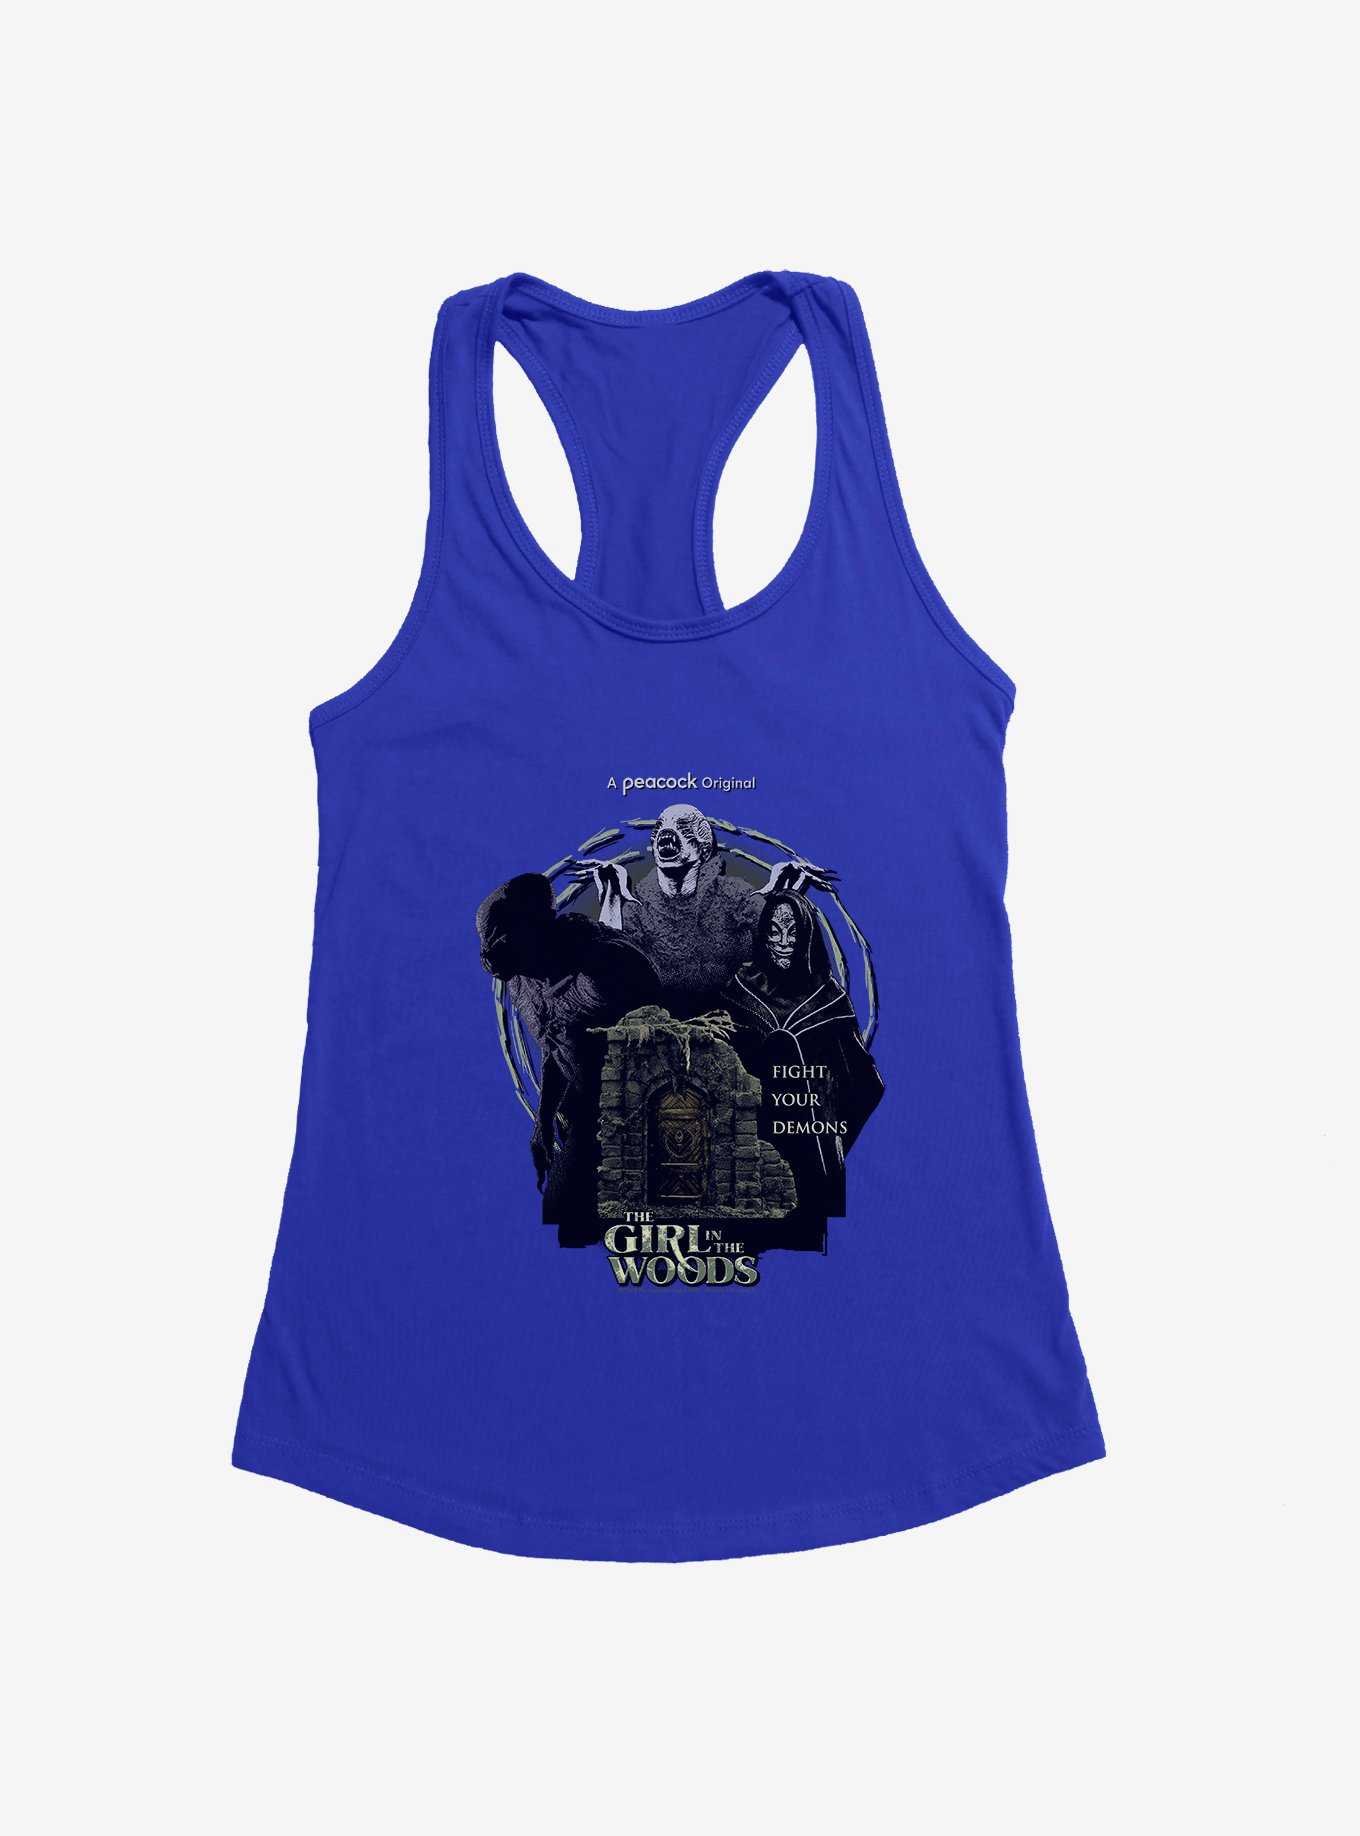 Peacock TV Girl In The Woods Fight Your Demons Girls Tank, , hi-res